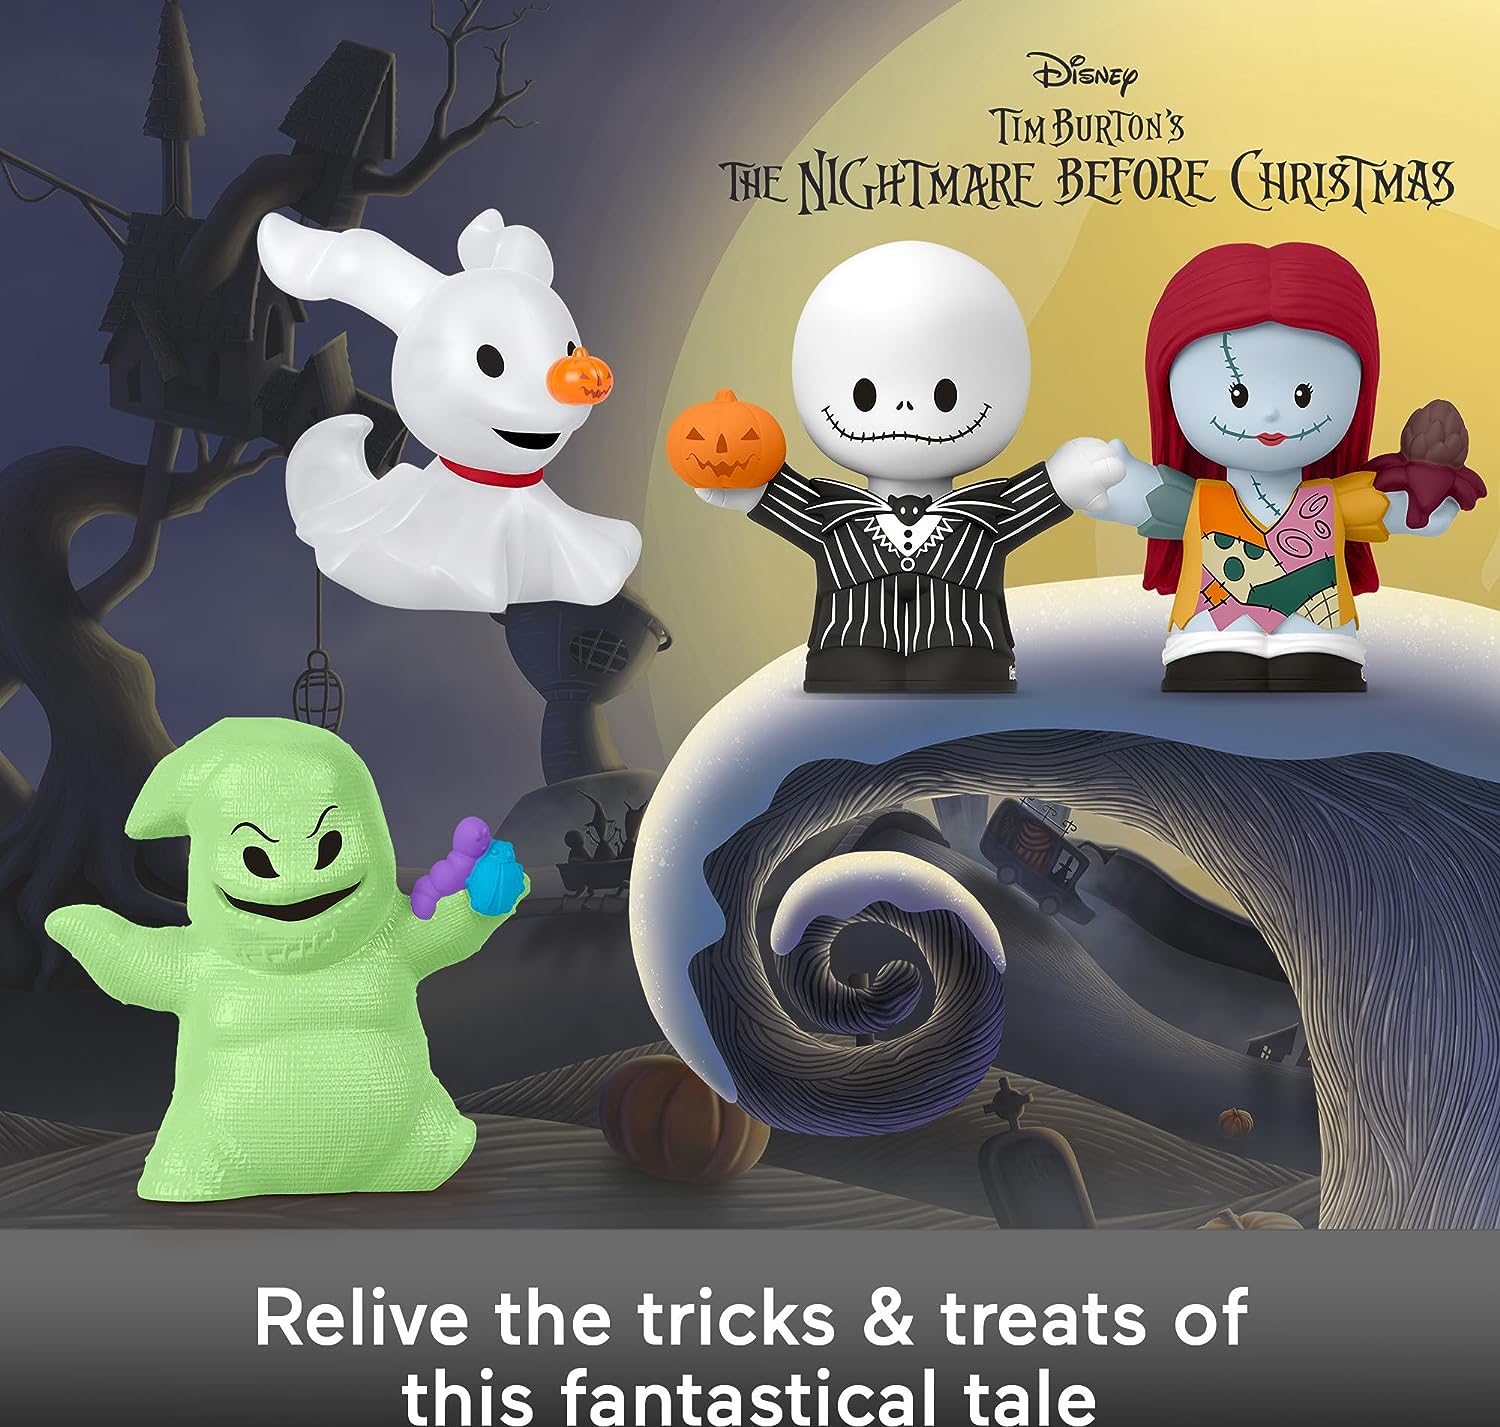 Mattel Shows Off Two Disney Halloween-Themed Little People Collector Sets